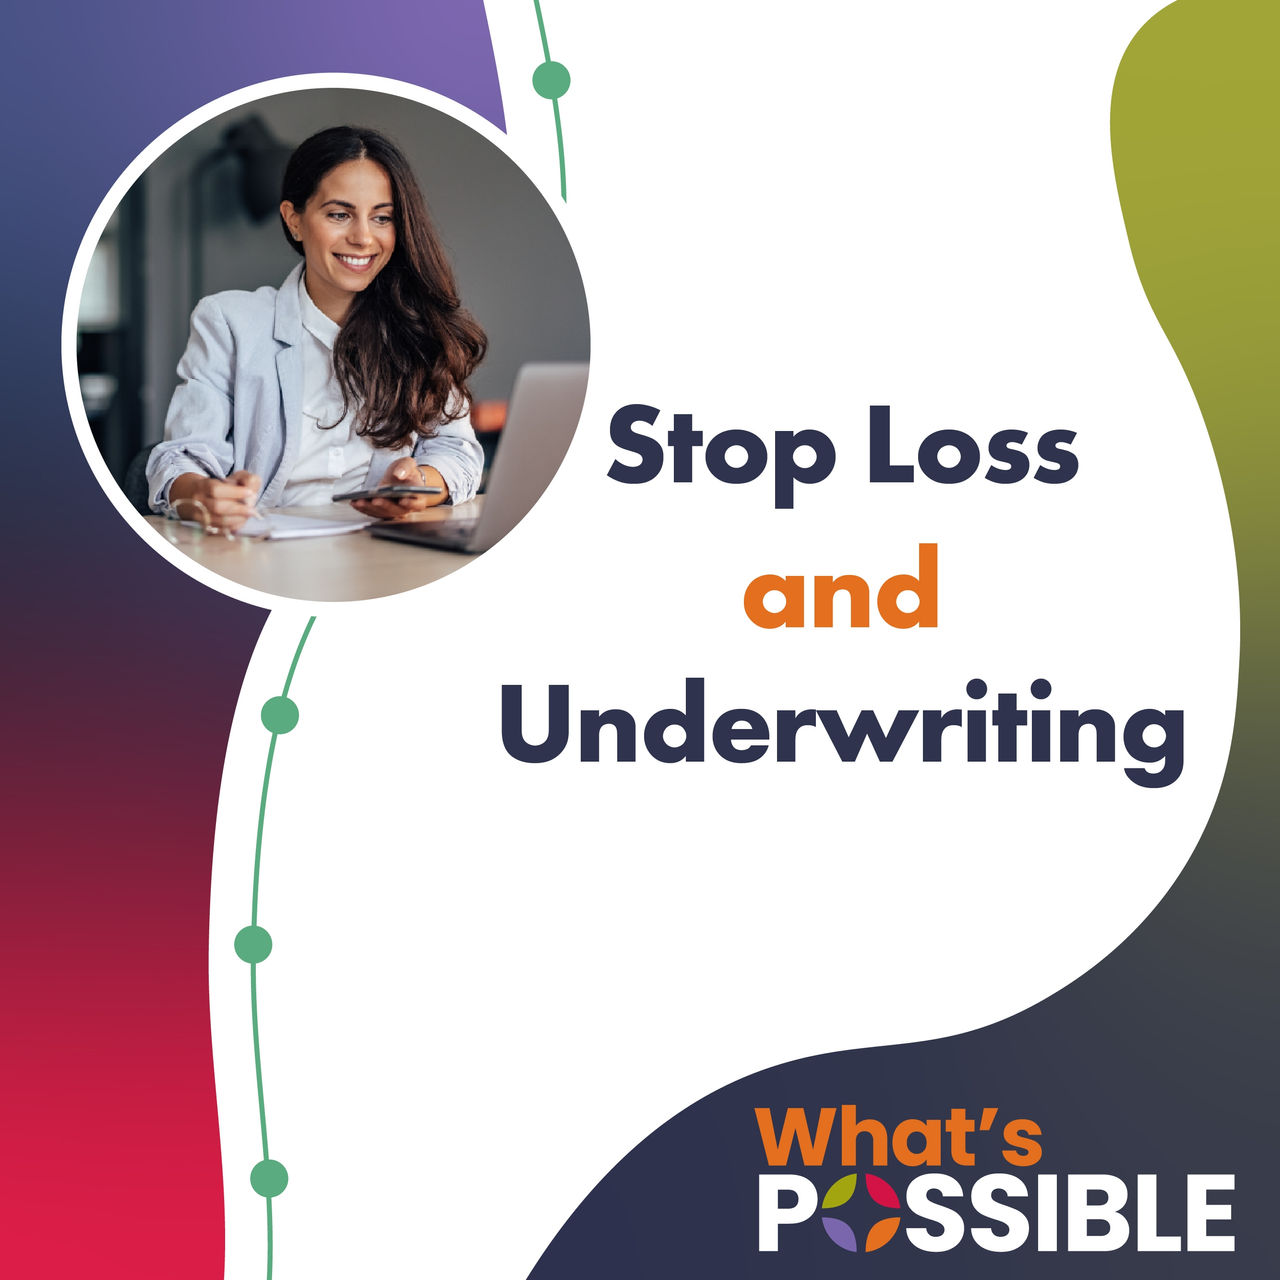 Stop Loss and Underwriting